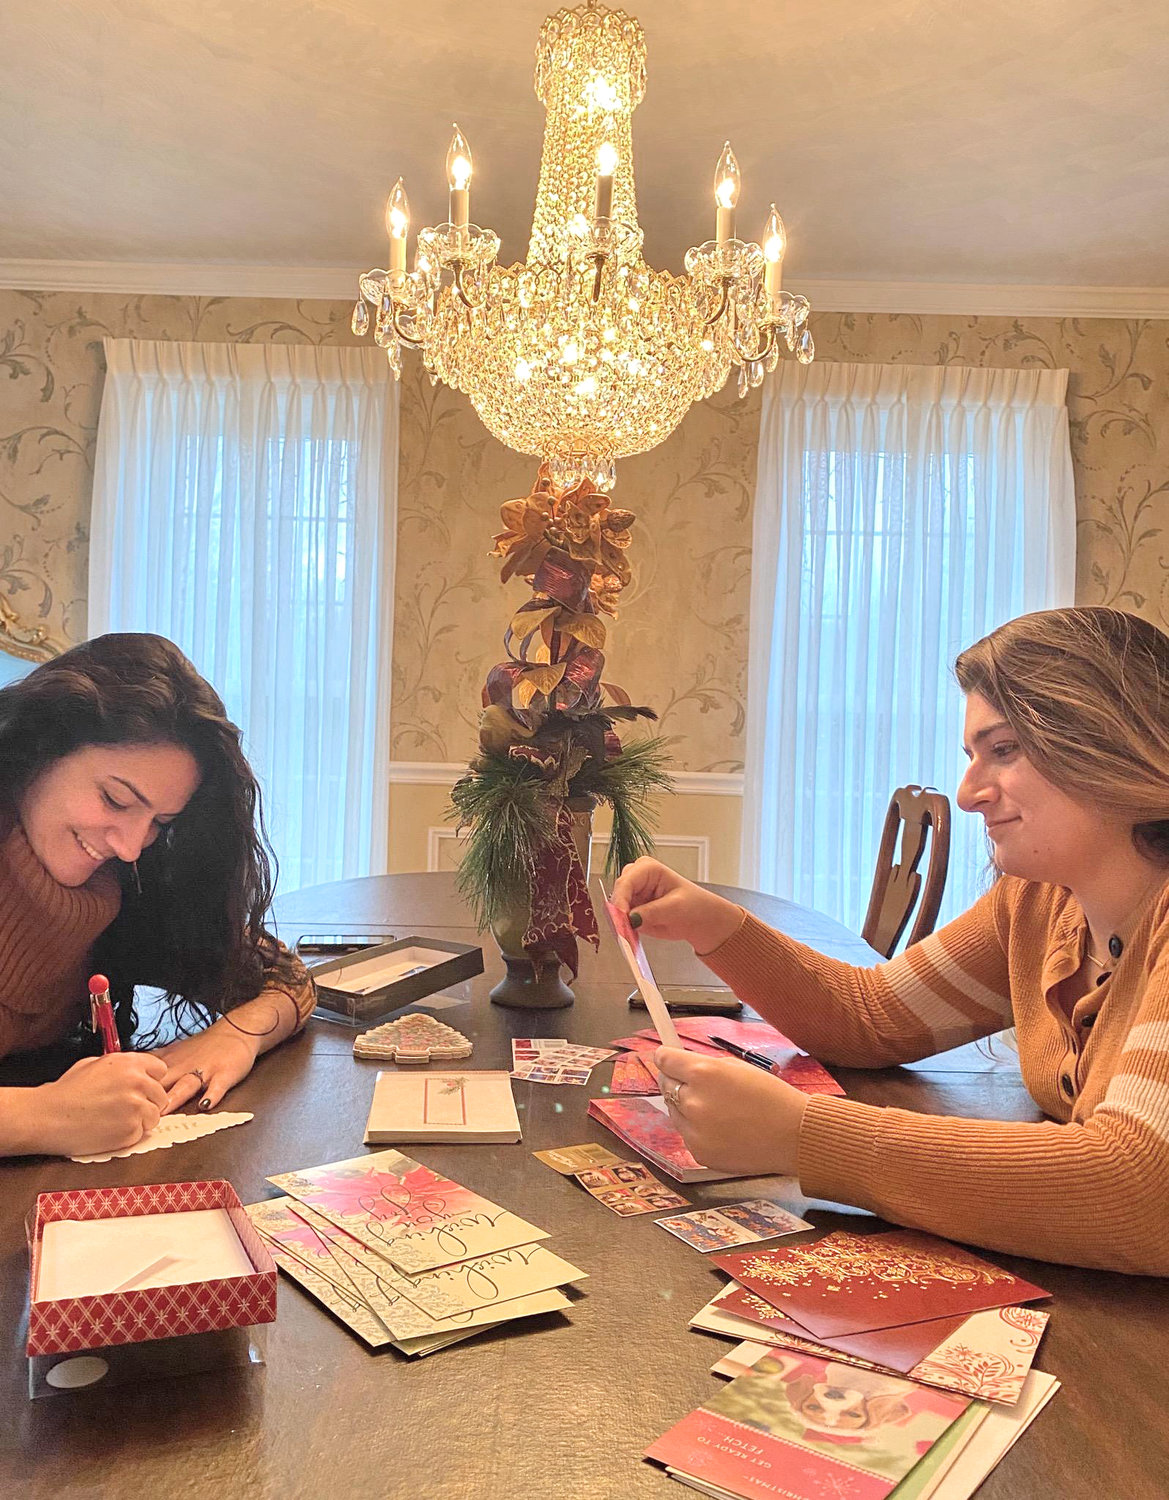 THINKING OF YOU — Alissa and Arica Tehan, of New Hartford, help out by writing messages of holiday cheer as part of the Cards Across America program. Alissa, an insurance professional, and Arica, a pharmacy student, are the granddaughters of Virginia Viscosi, one of the program organizers.